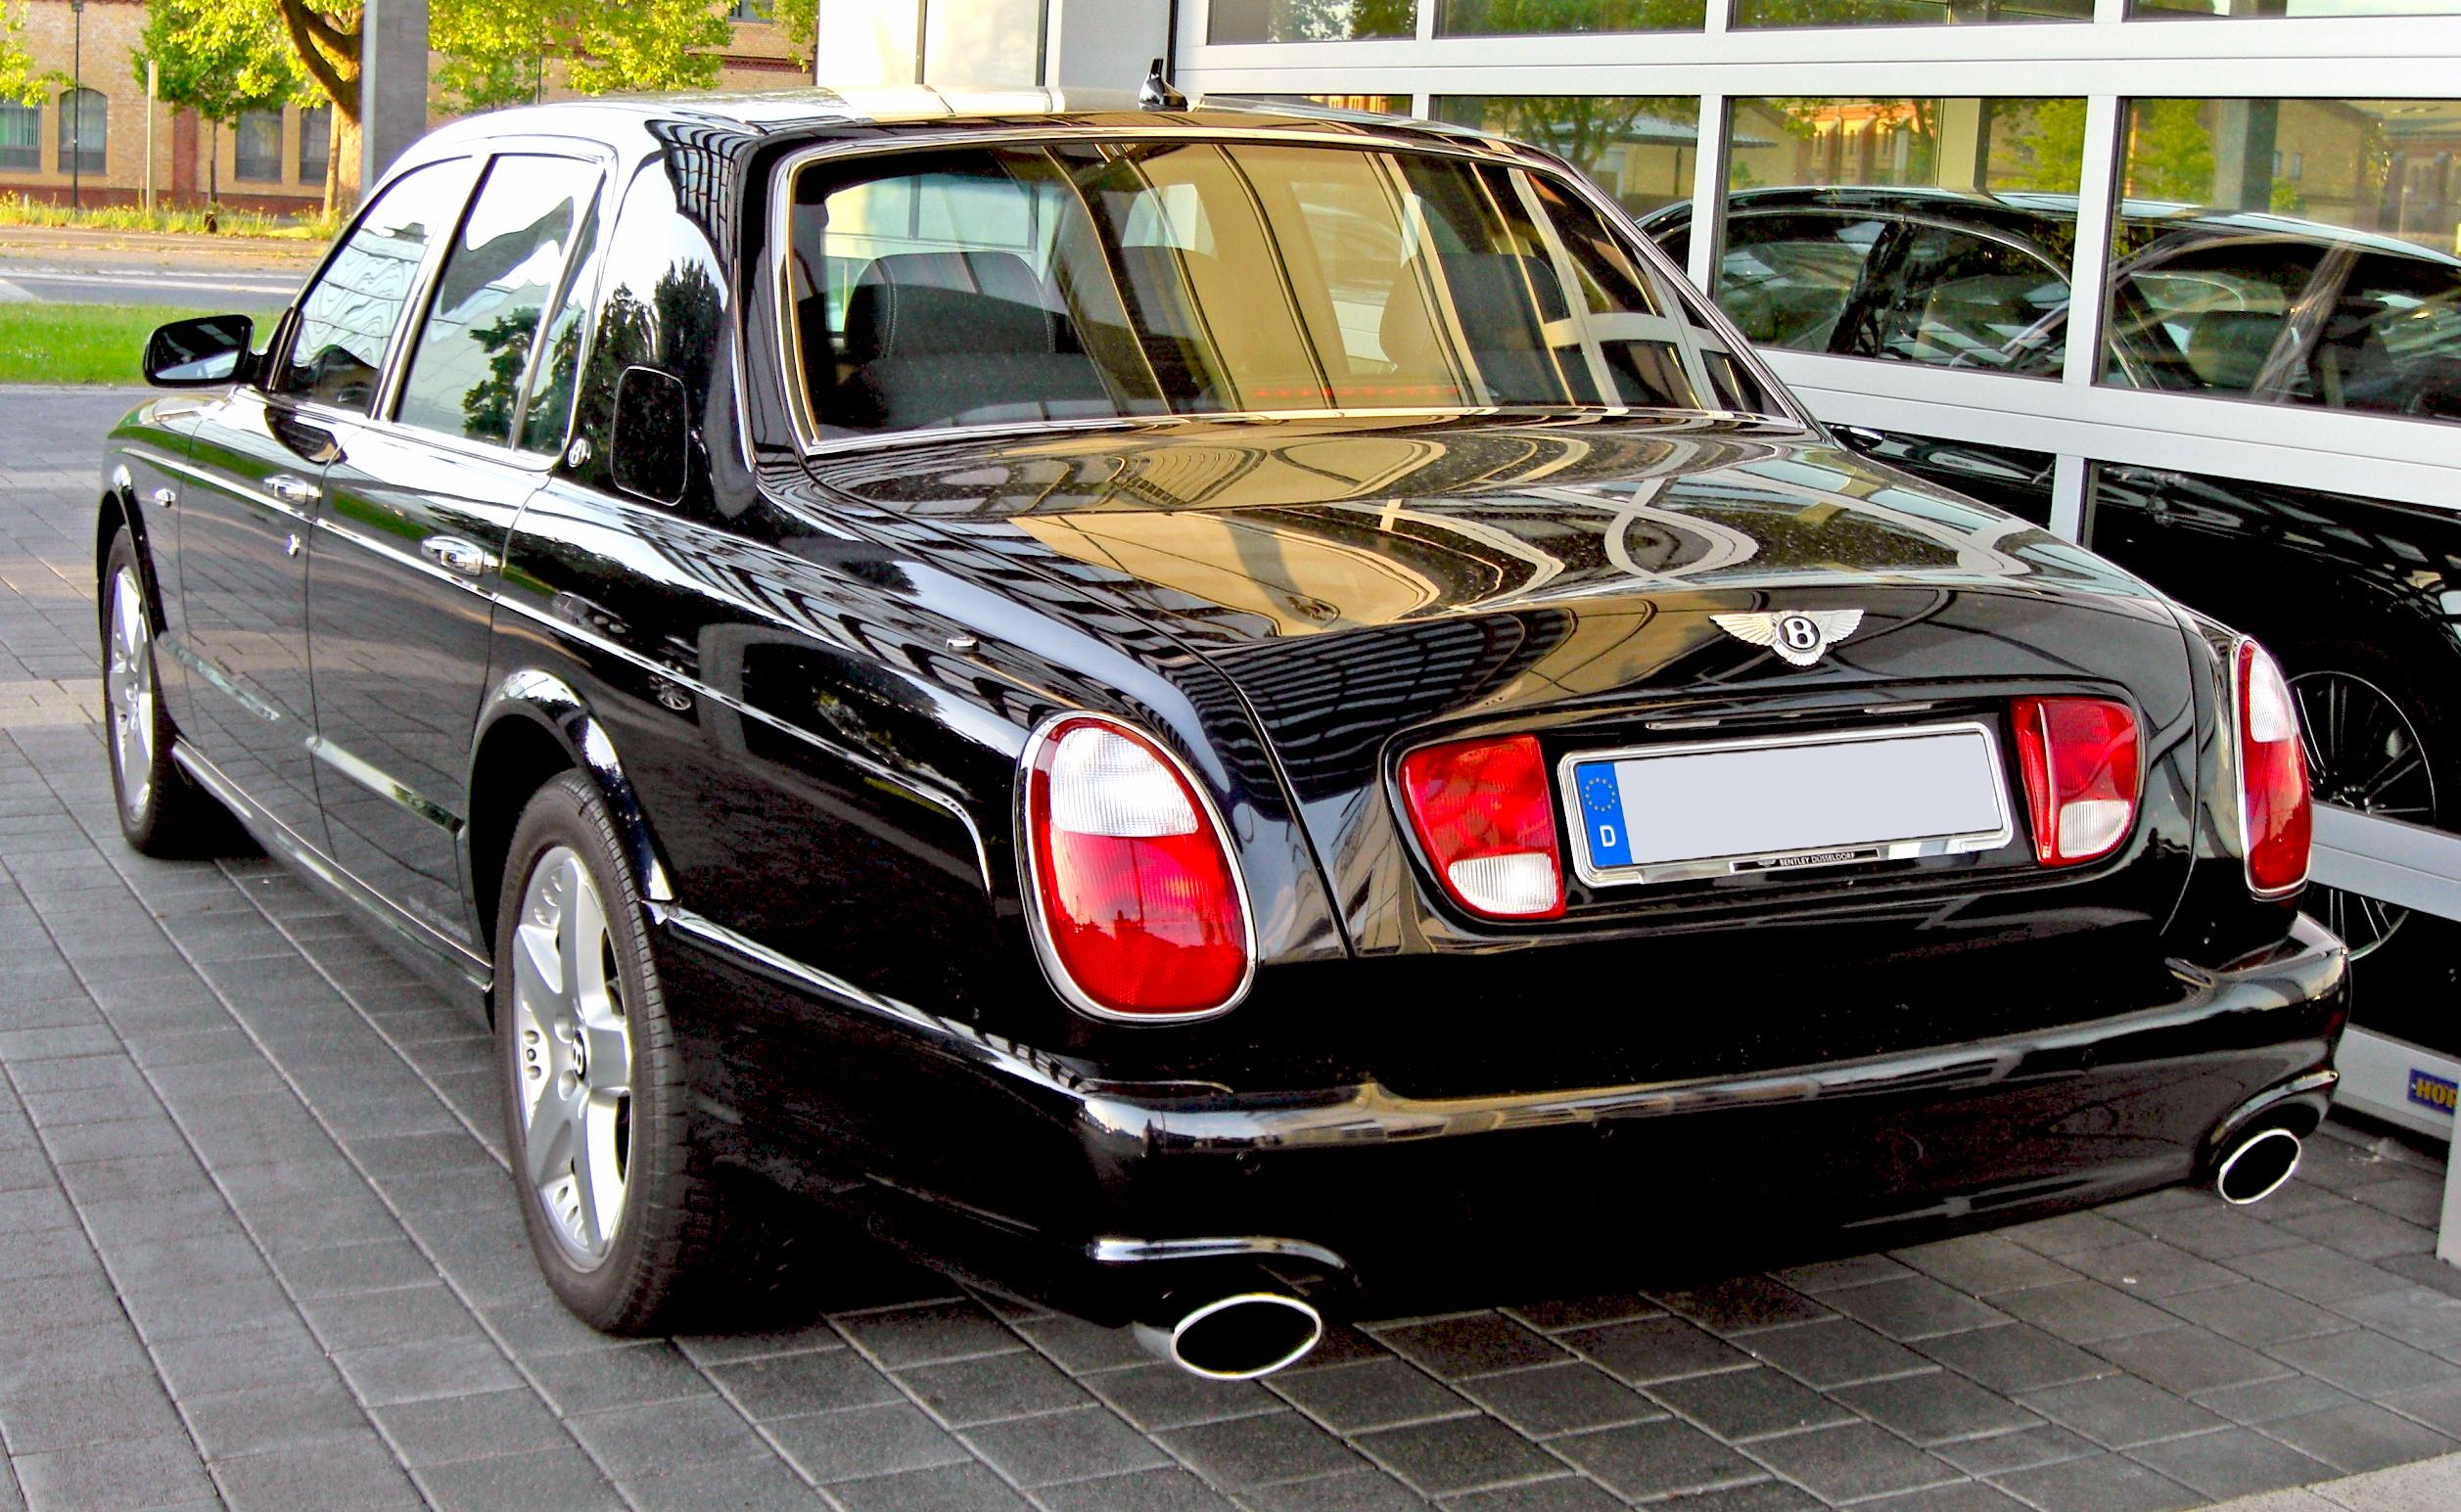 Bentley Arnage Backgrounds, Compatible - PC, Mobile, Gadgets| 2514x1545 px